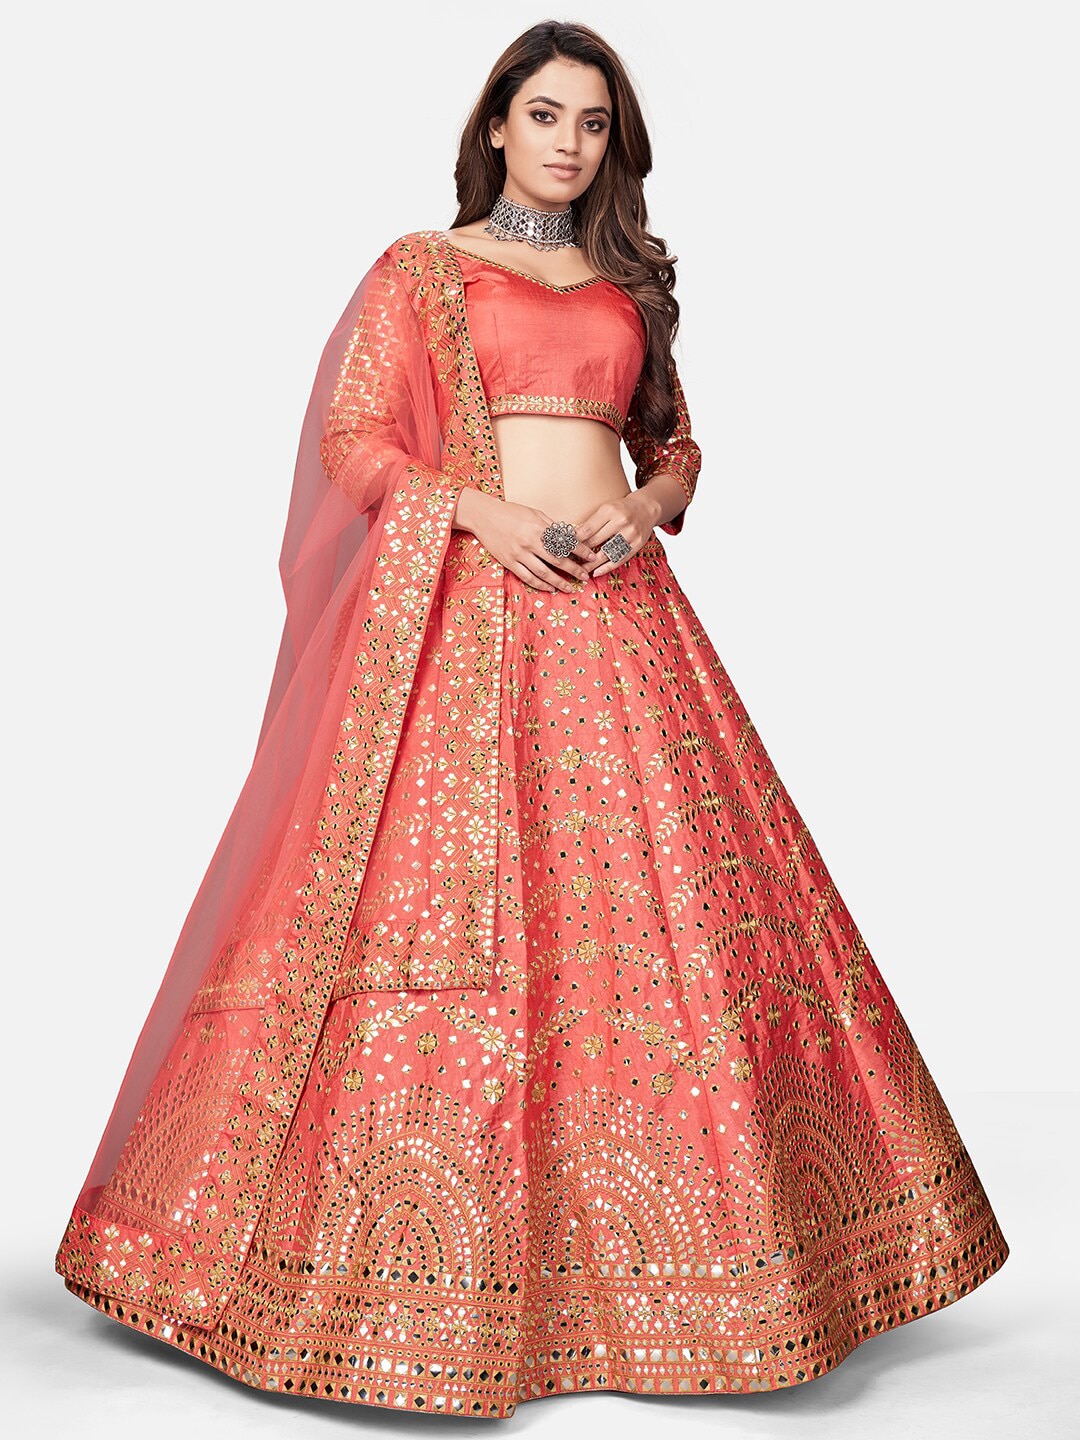 WHITE FIRE Peach & Gold Embellished Mirror Work Semi-Stitched Lehenga & Unstitched Blouse Price in India